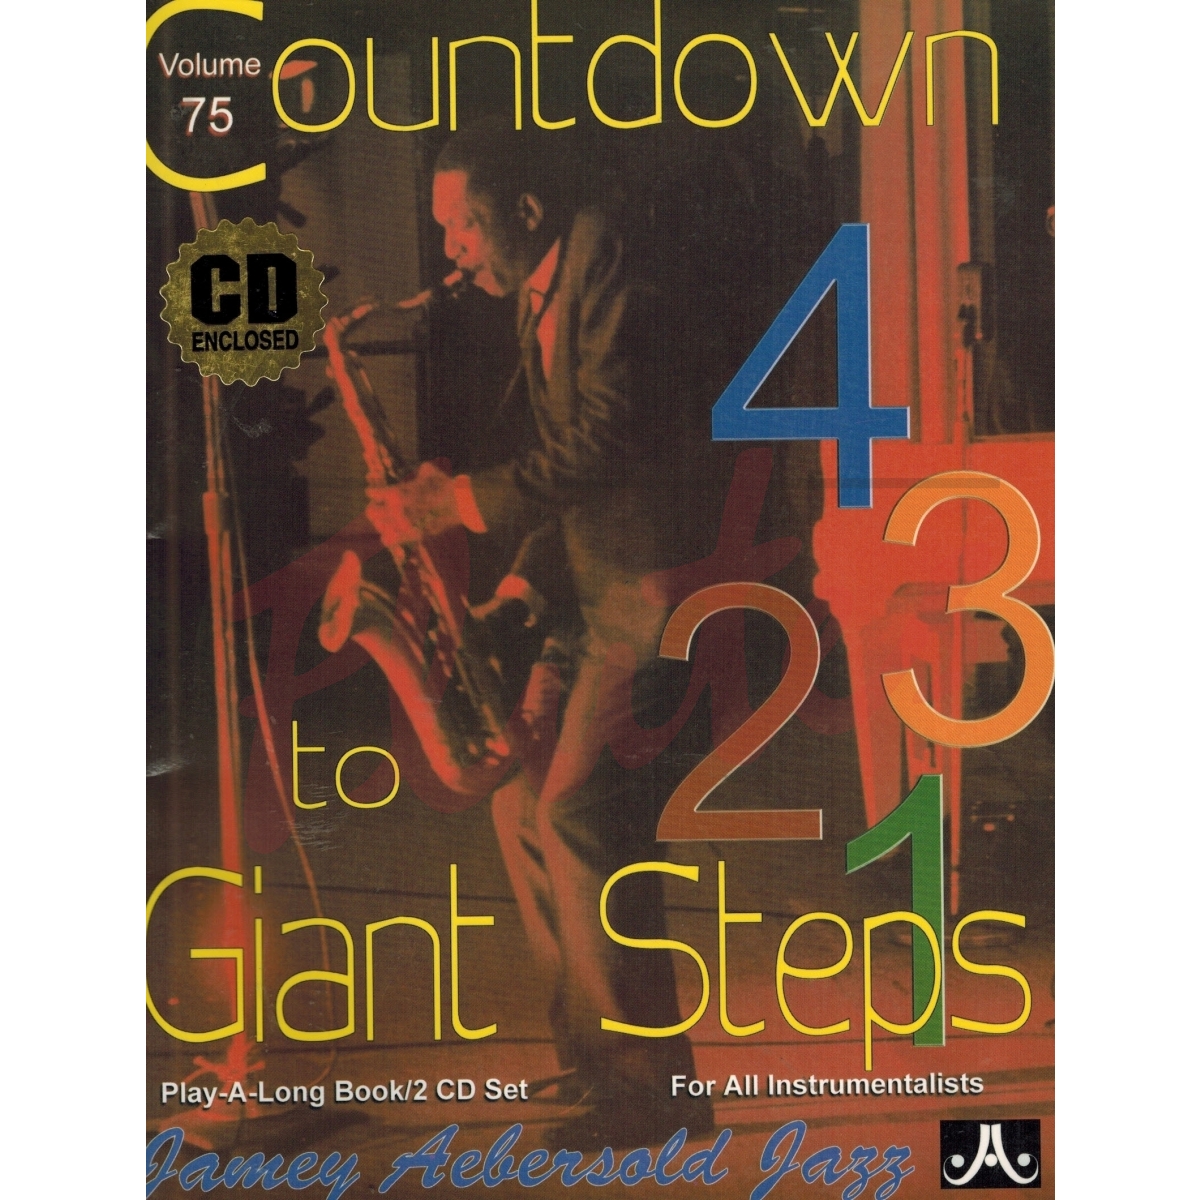 Countdown to Giant Steps